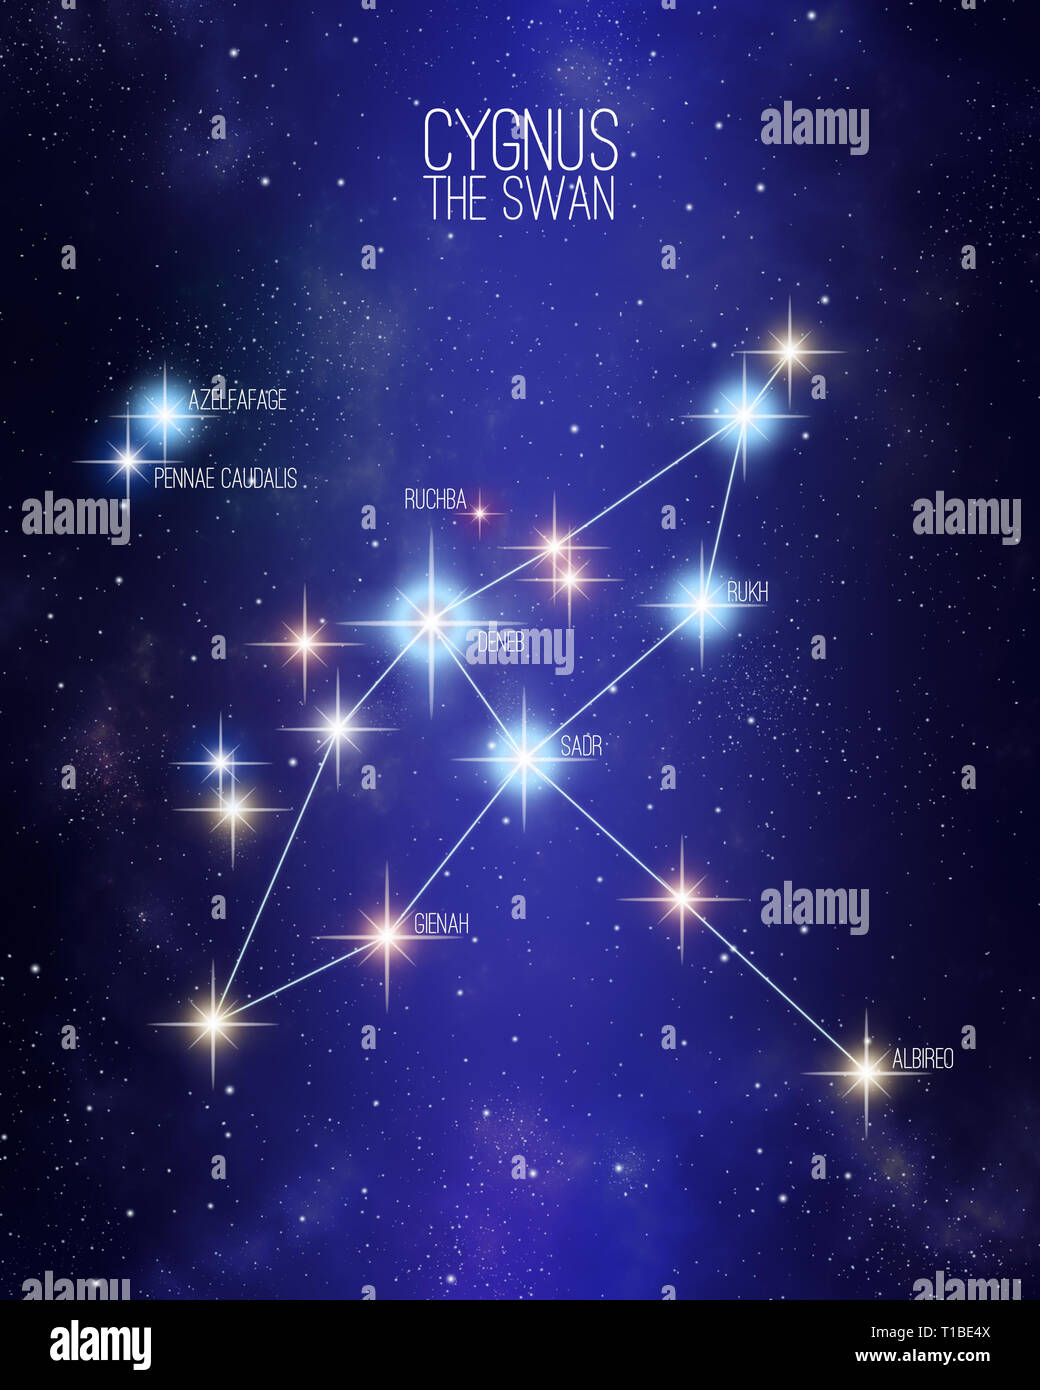 Cygnus the swan constellation on a starry space background with the names of its main stars. Relative sizes and different color shades based on the sp Stock Photo